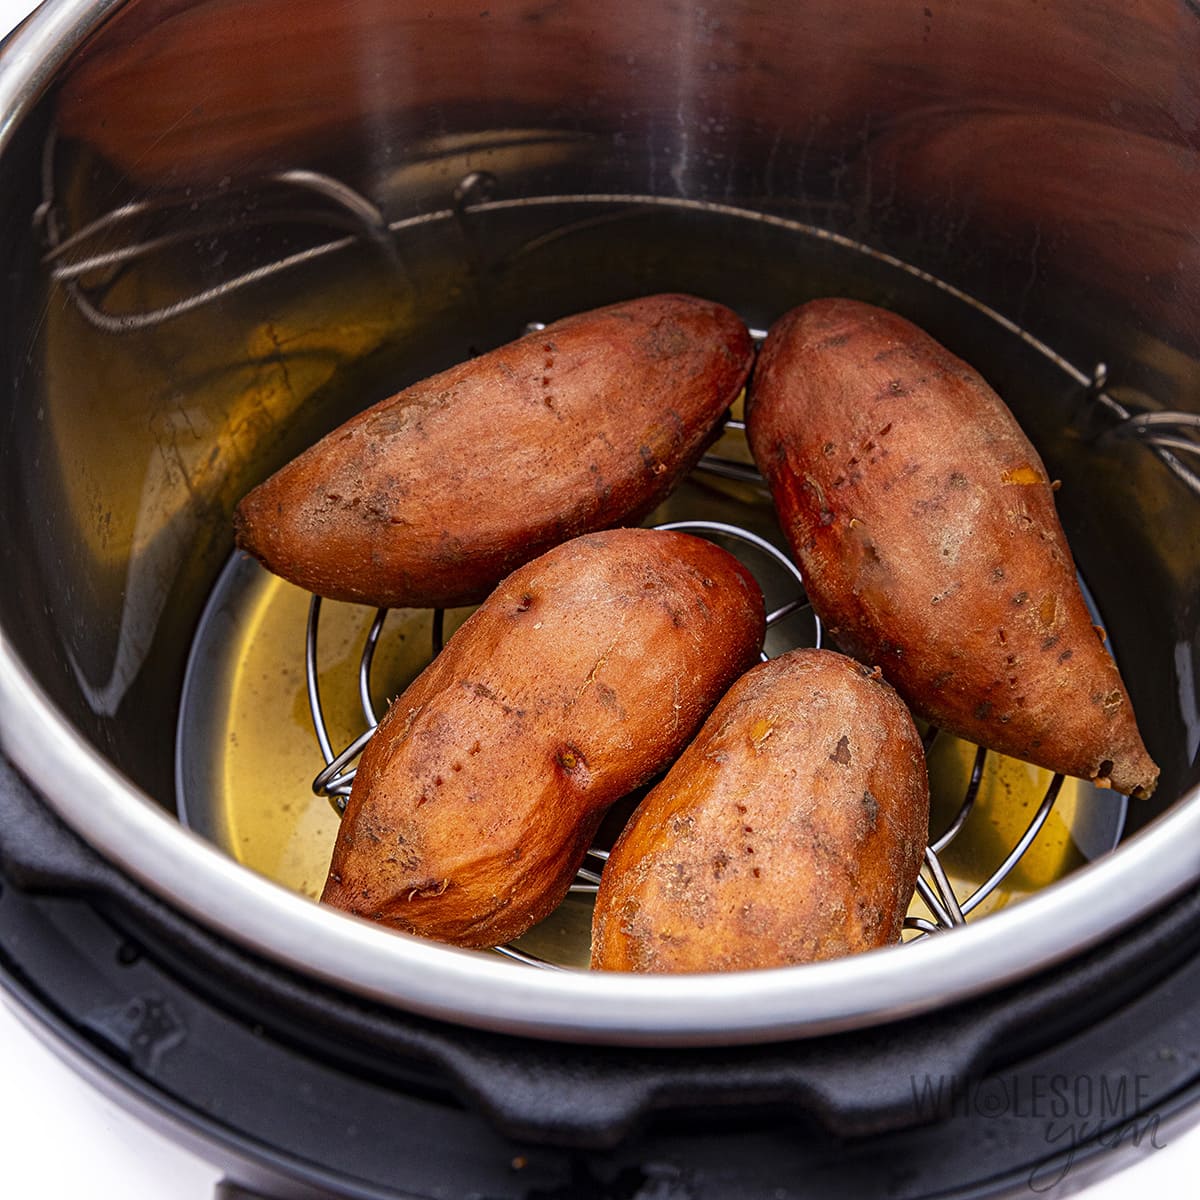 “Bake” Sweet Potatoes in the Instant Pot.